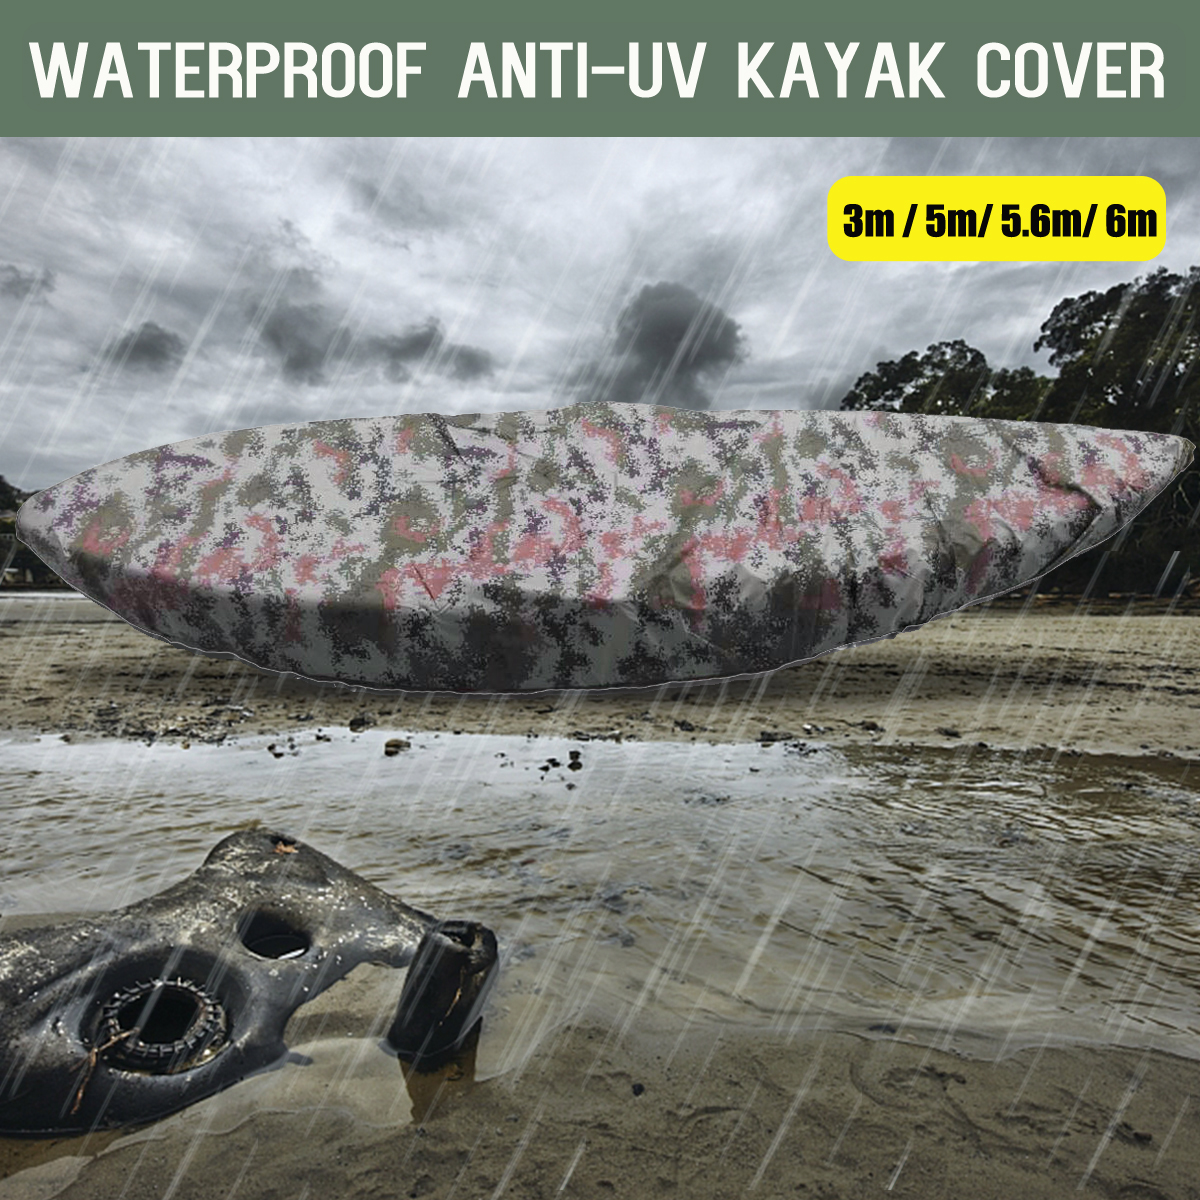 35566m-Kayak-Storage-Cover-Waterproof-UV-Sun-Protector-Fishing-Canoe-Cover-Boats-Protector-Outdoor-F-1780264-1